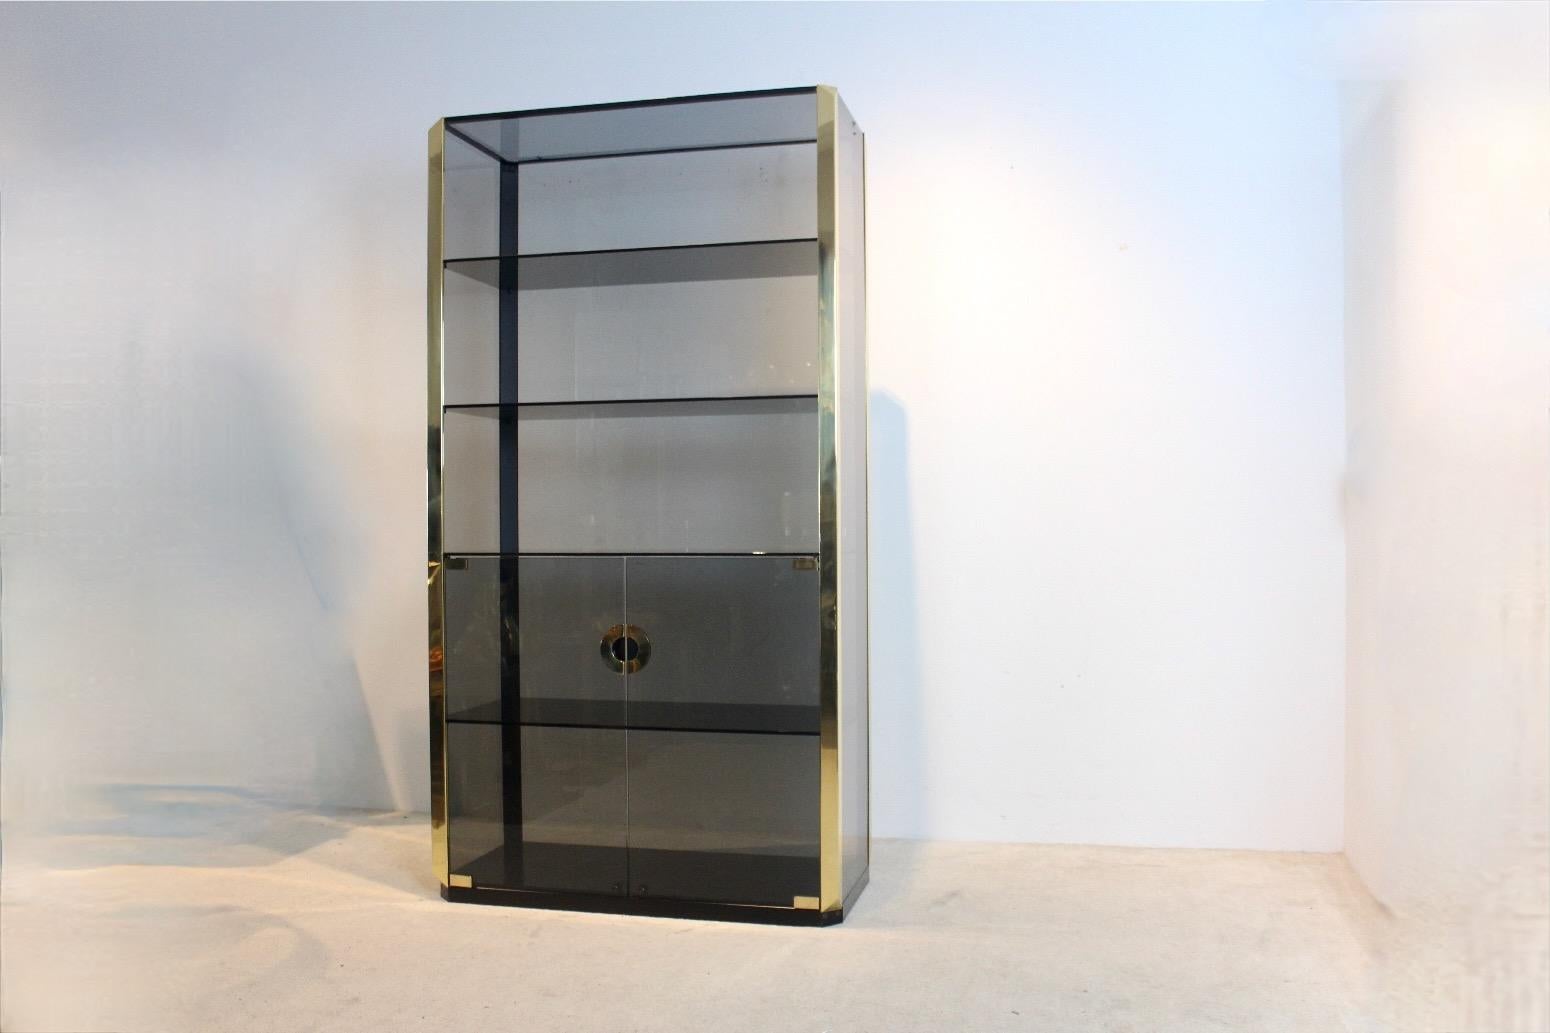 Beautiful Smoked glass cabinet designed by Willy Rizzo for Mario Sabot, 1970s. The cabinet comes with smoked glass with accenting brass hardware. The frame of the cabinet is made of very solid steel. The lower part can be closed and has two doors